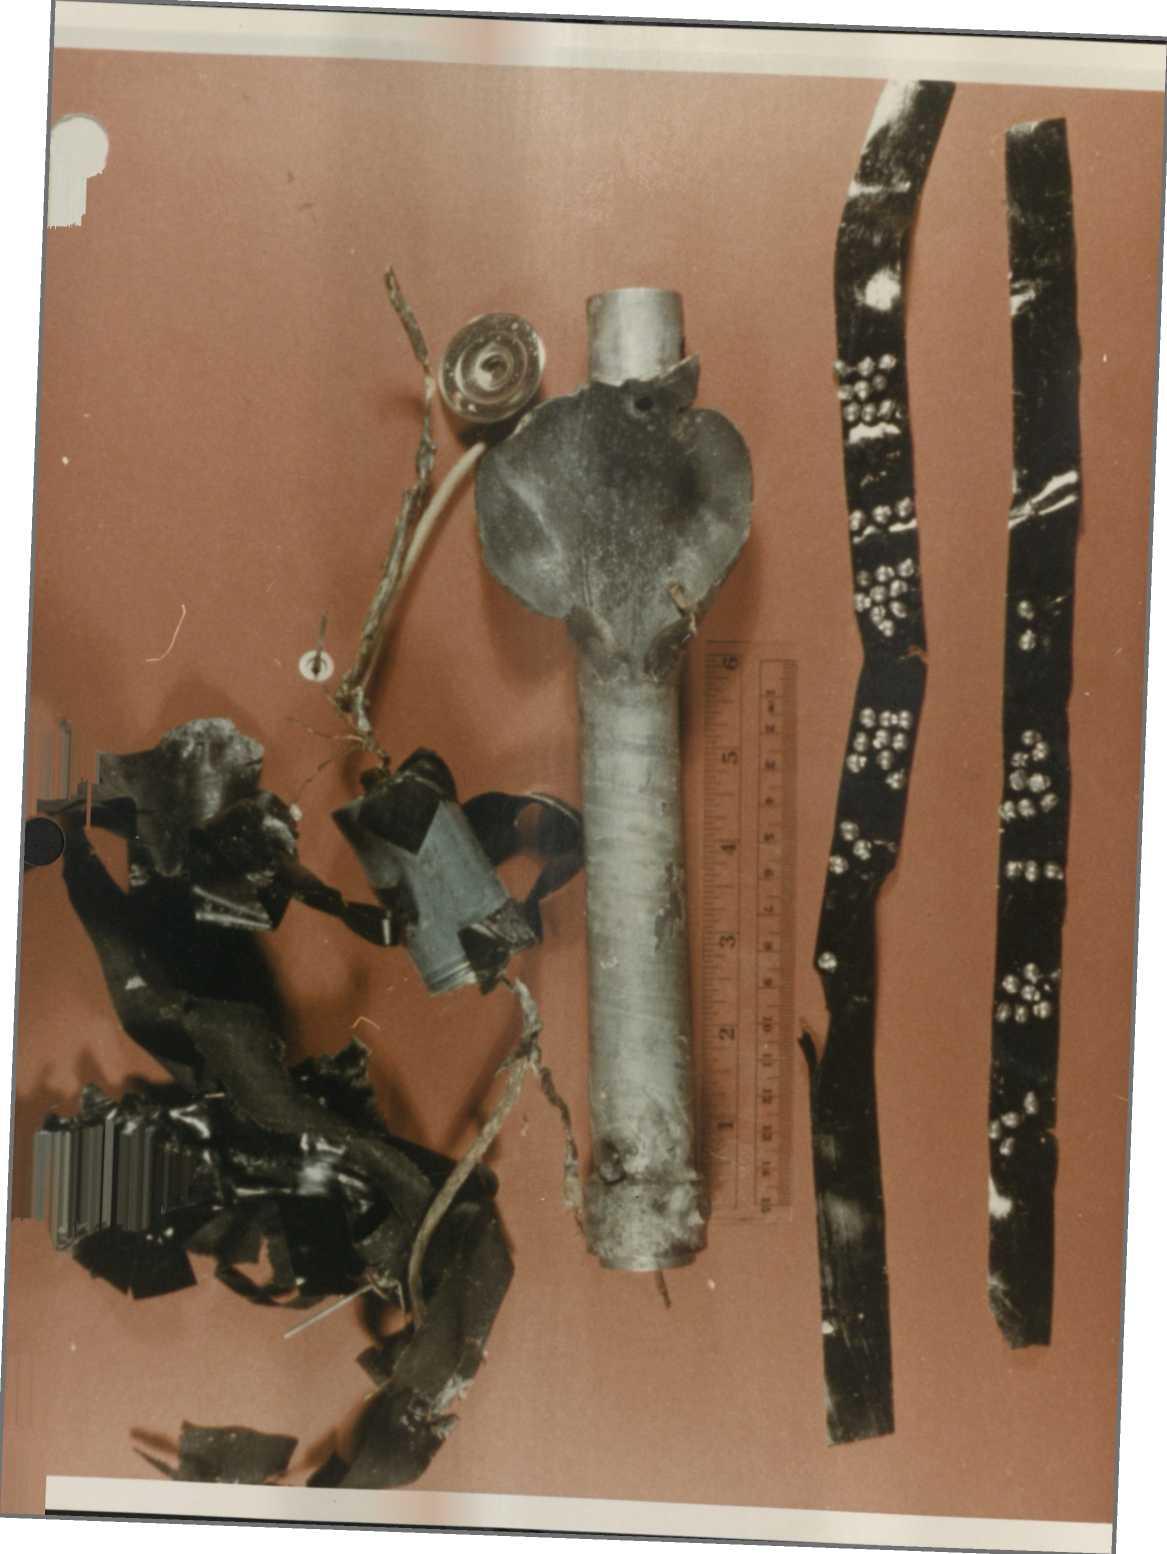 p-o-photos-of-explosive-devices-sent-in-mail-and-t-1.jpg